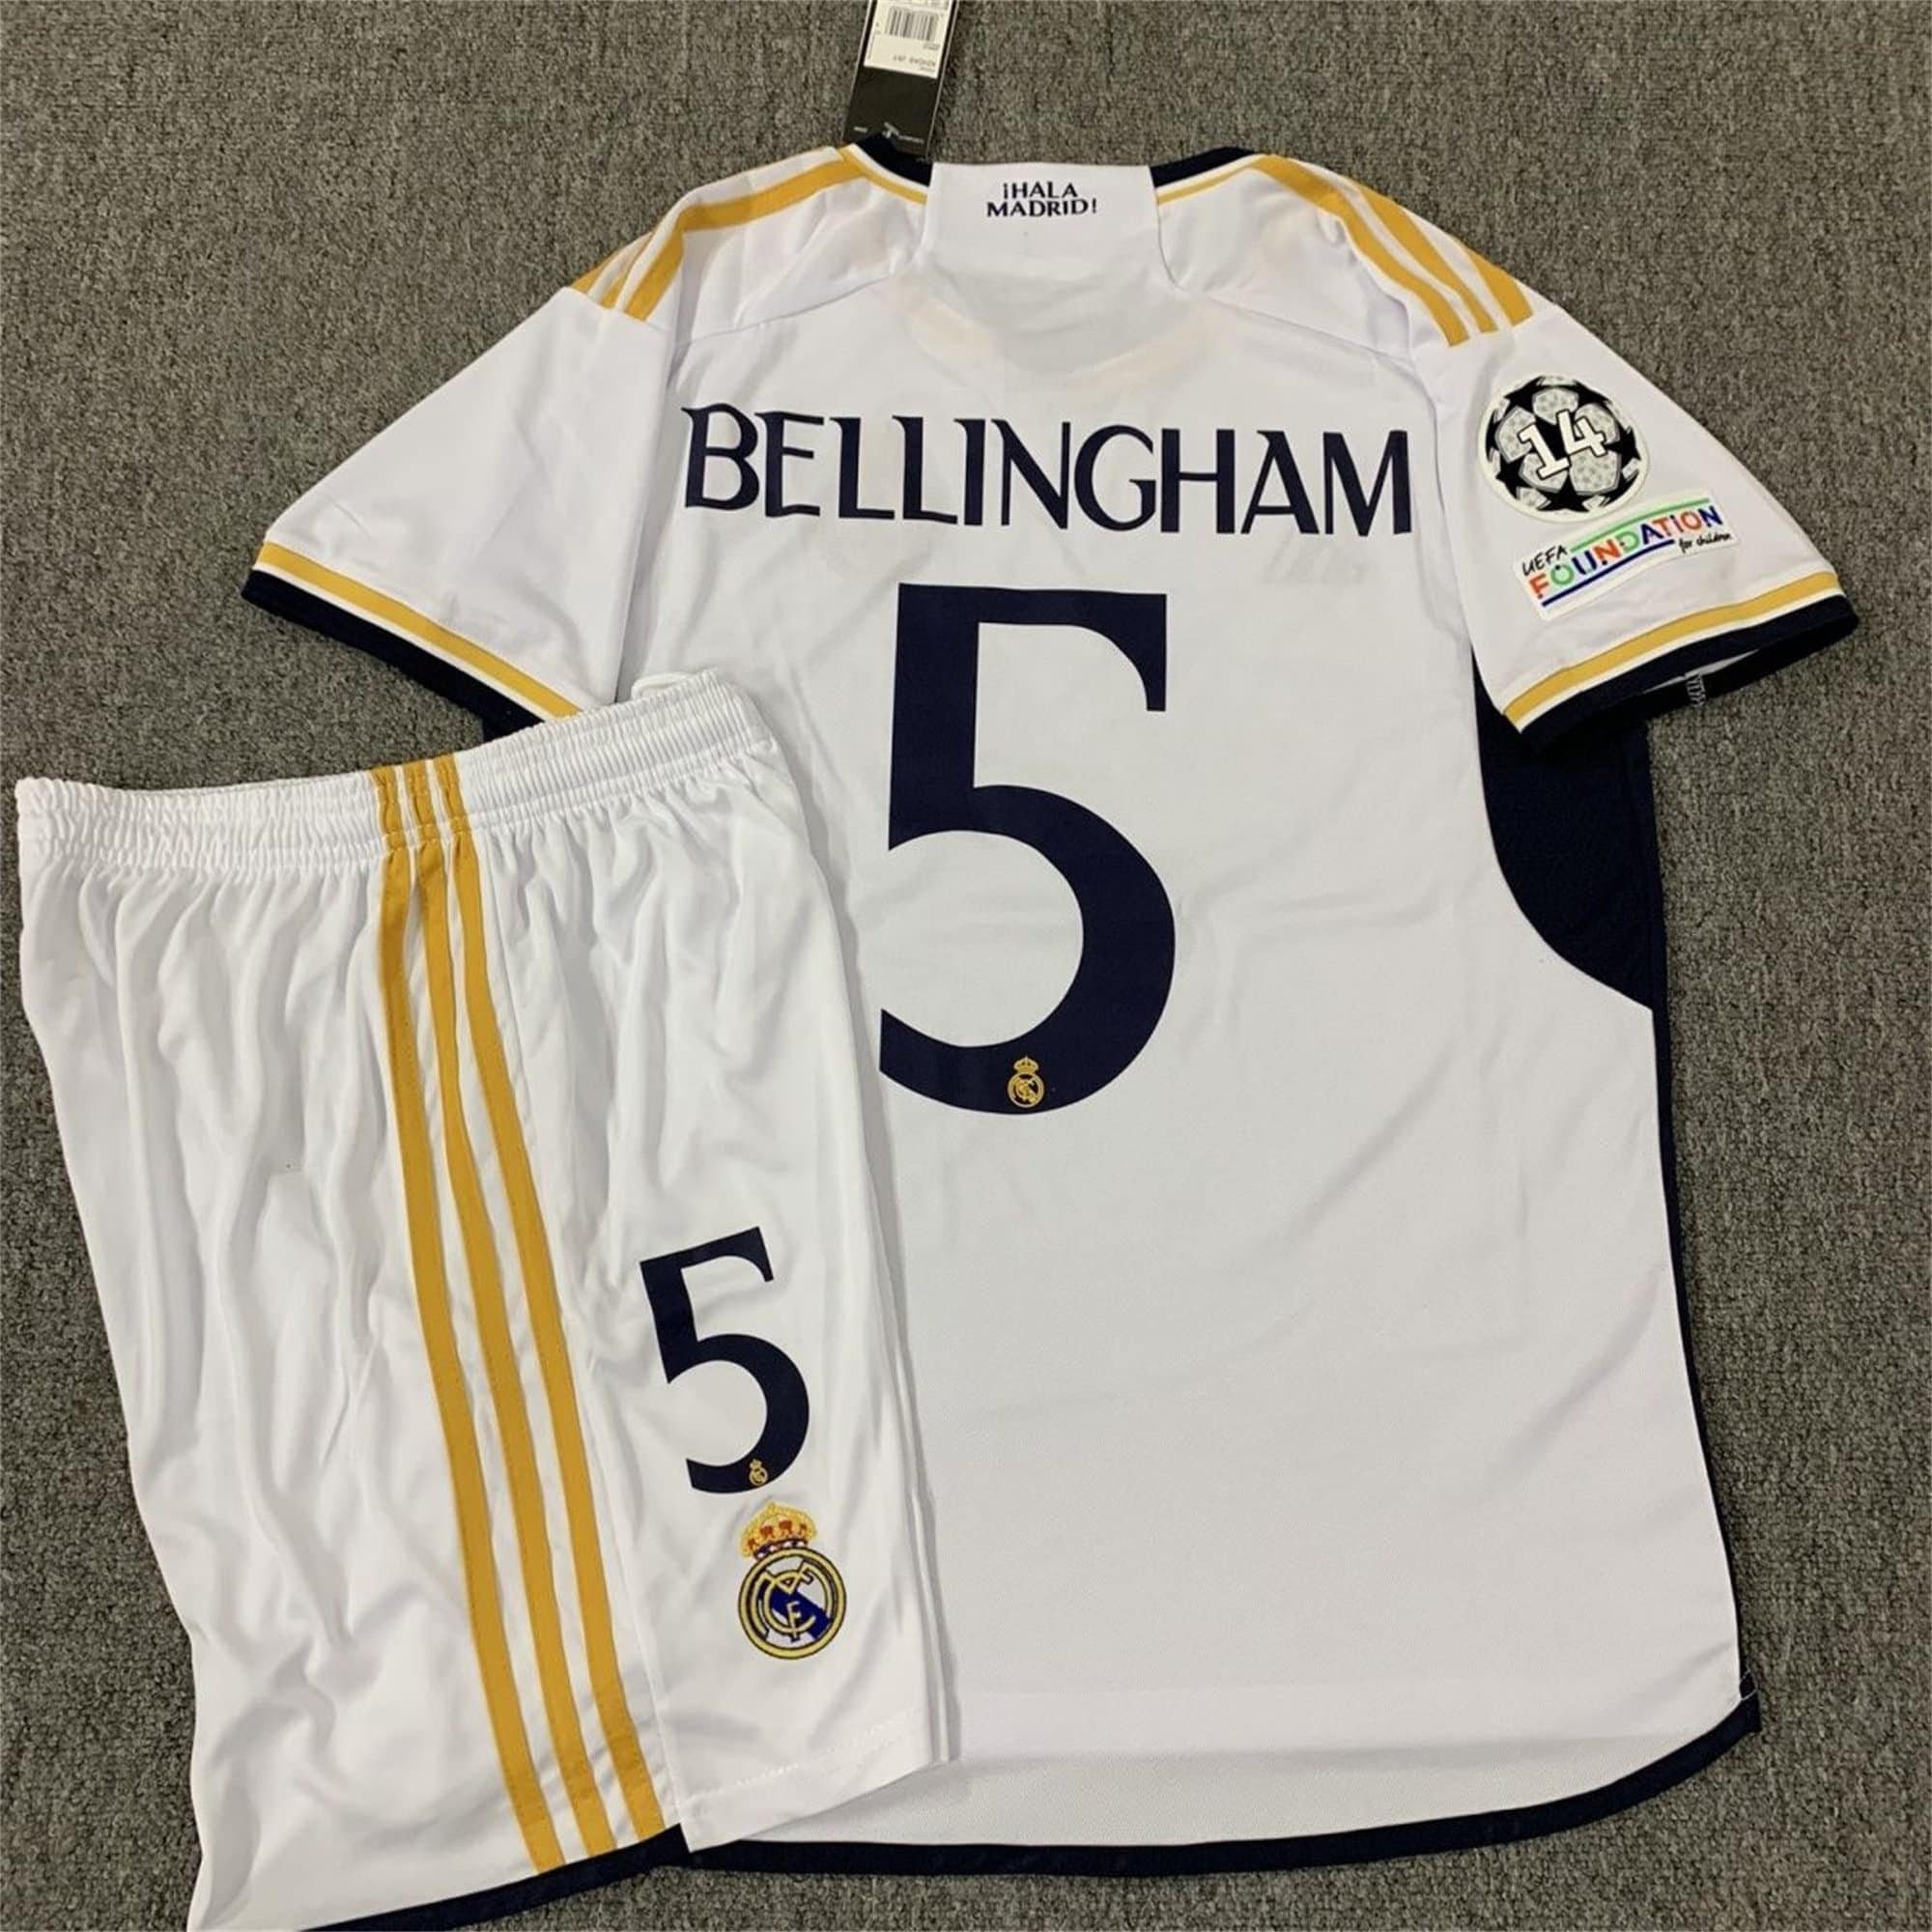 Size XL - NEW Mens Real Madrid Champions League Bellingham Player Version  Jersey